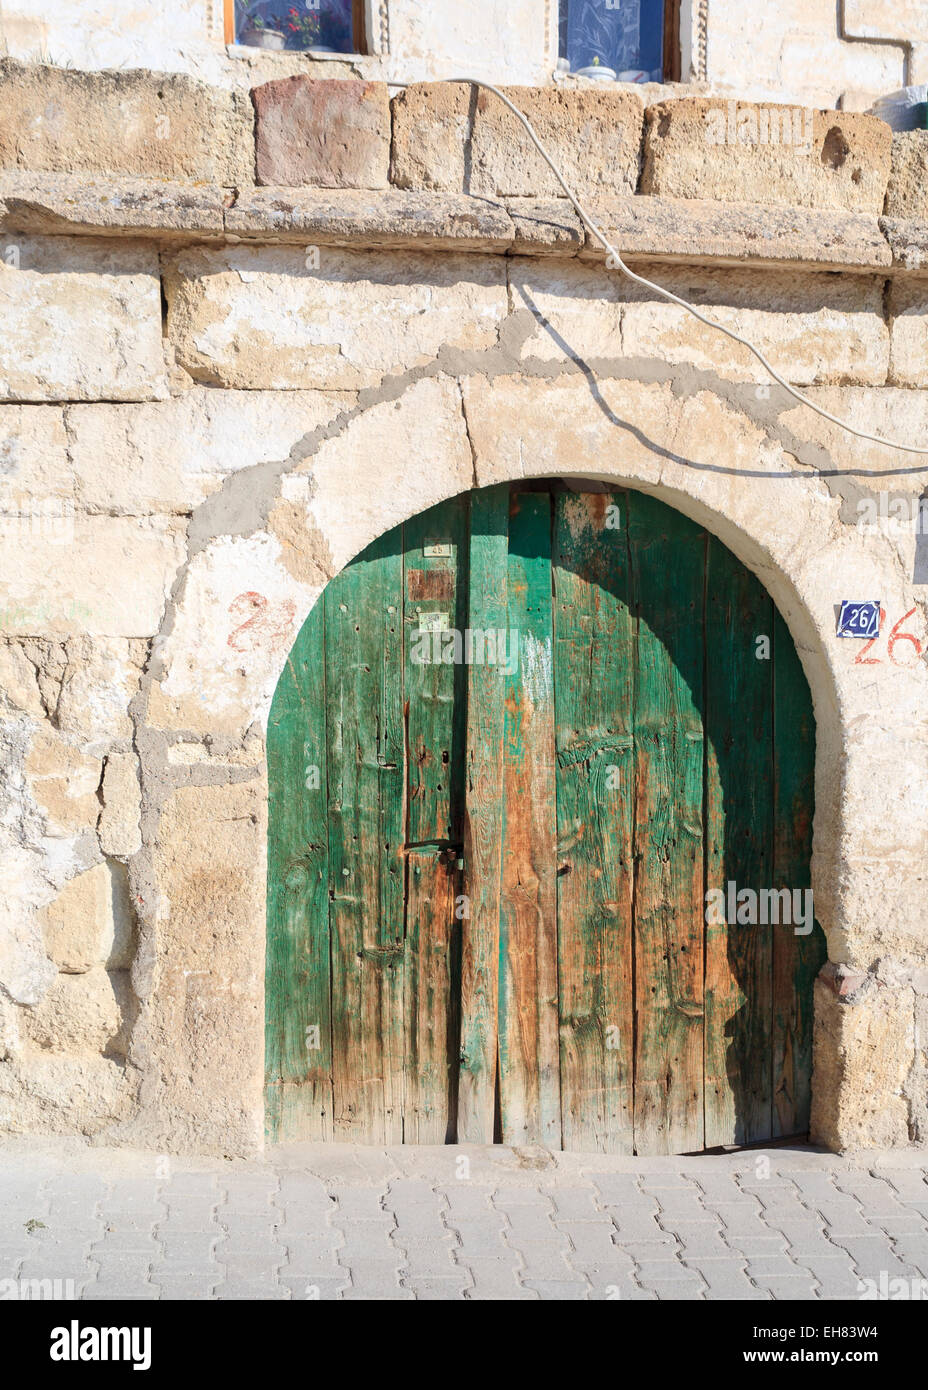 Old, dilapidated green wooden door in a stone arch doorway in a wall, Goreme, Cappadocia, Turkey Stock Photo